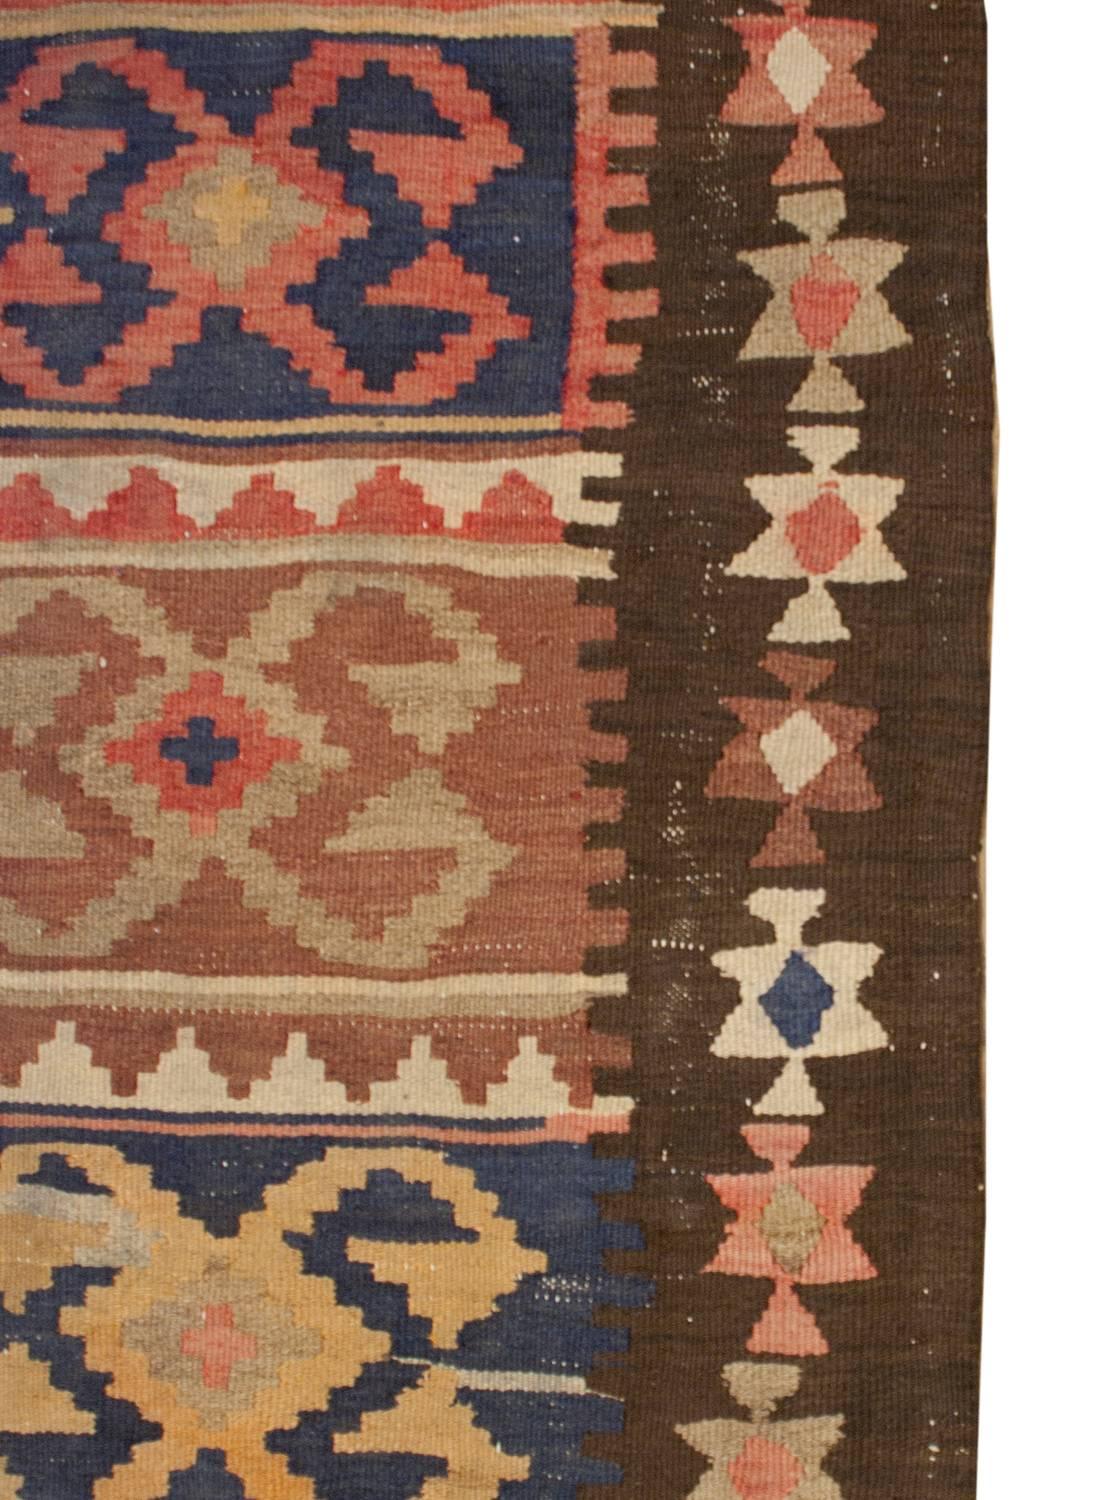 An early 20th century Persian Shahsavan Kilim runner with an incredible motif of geometric forms on multicolored stripes running the length of the runner. The border is simple with multicolored stylized flowers on a black background.